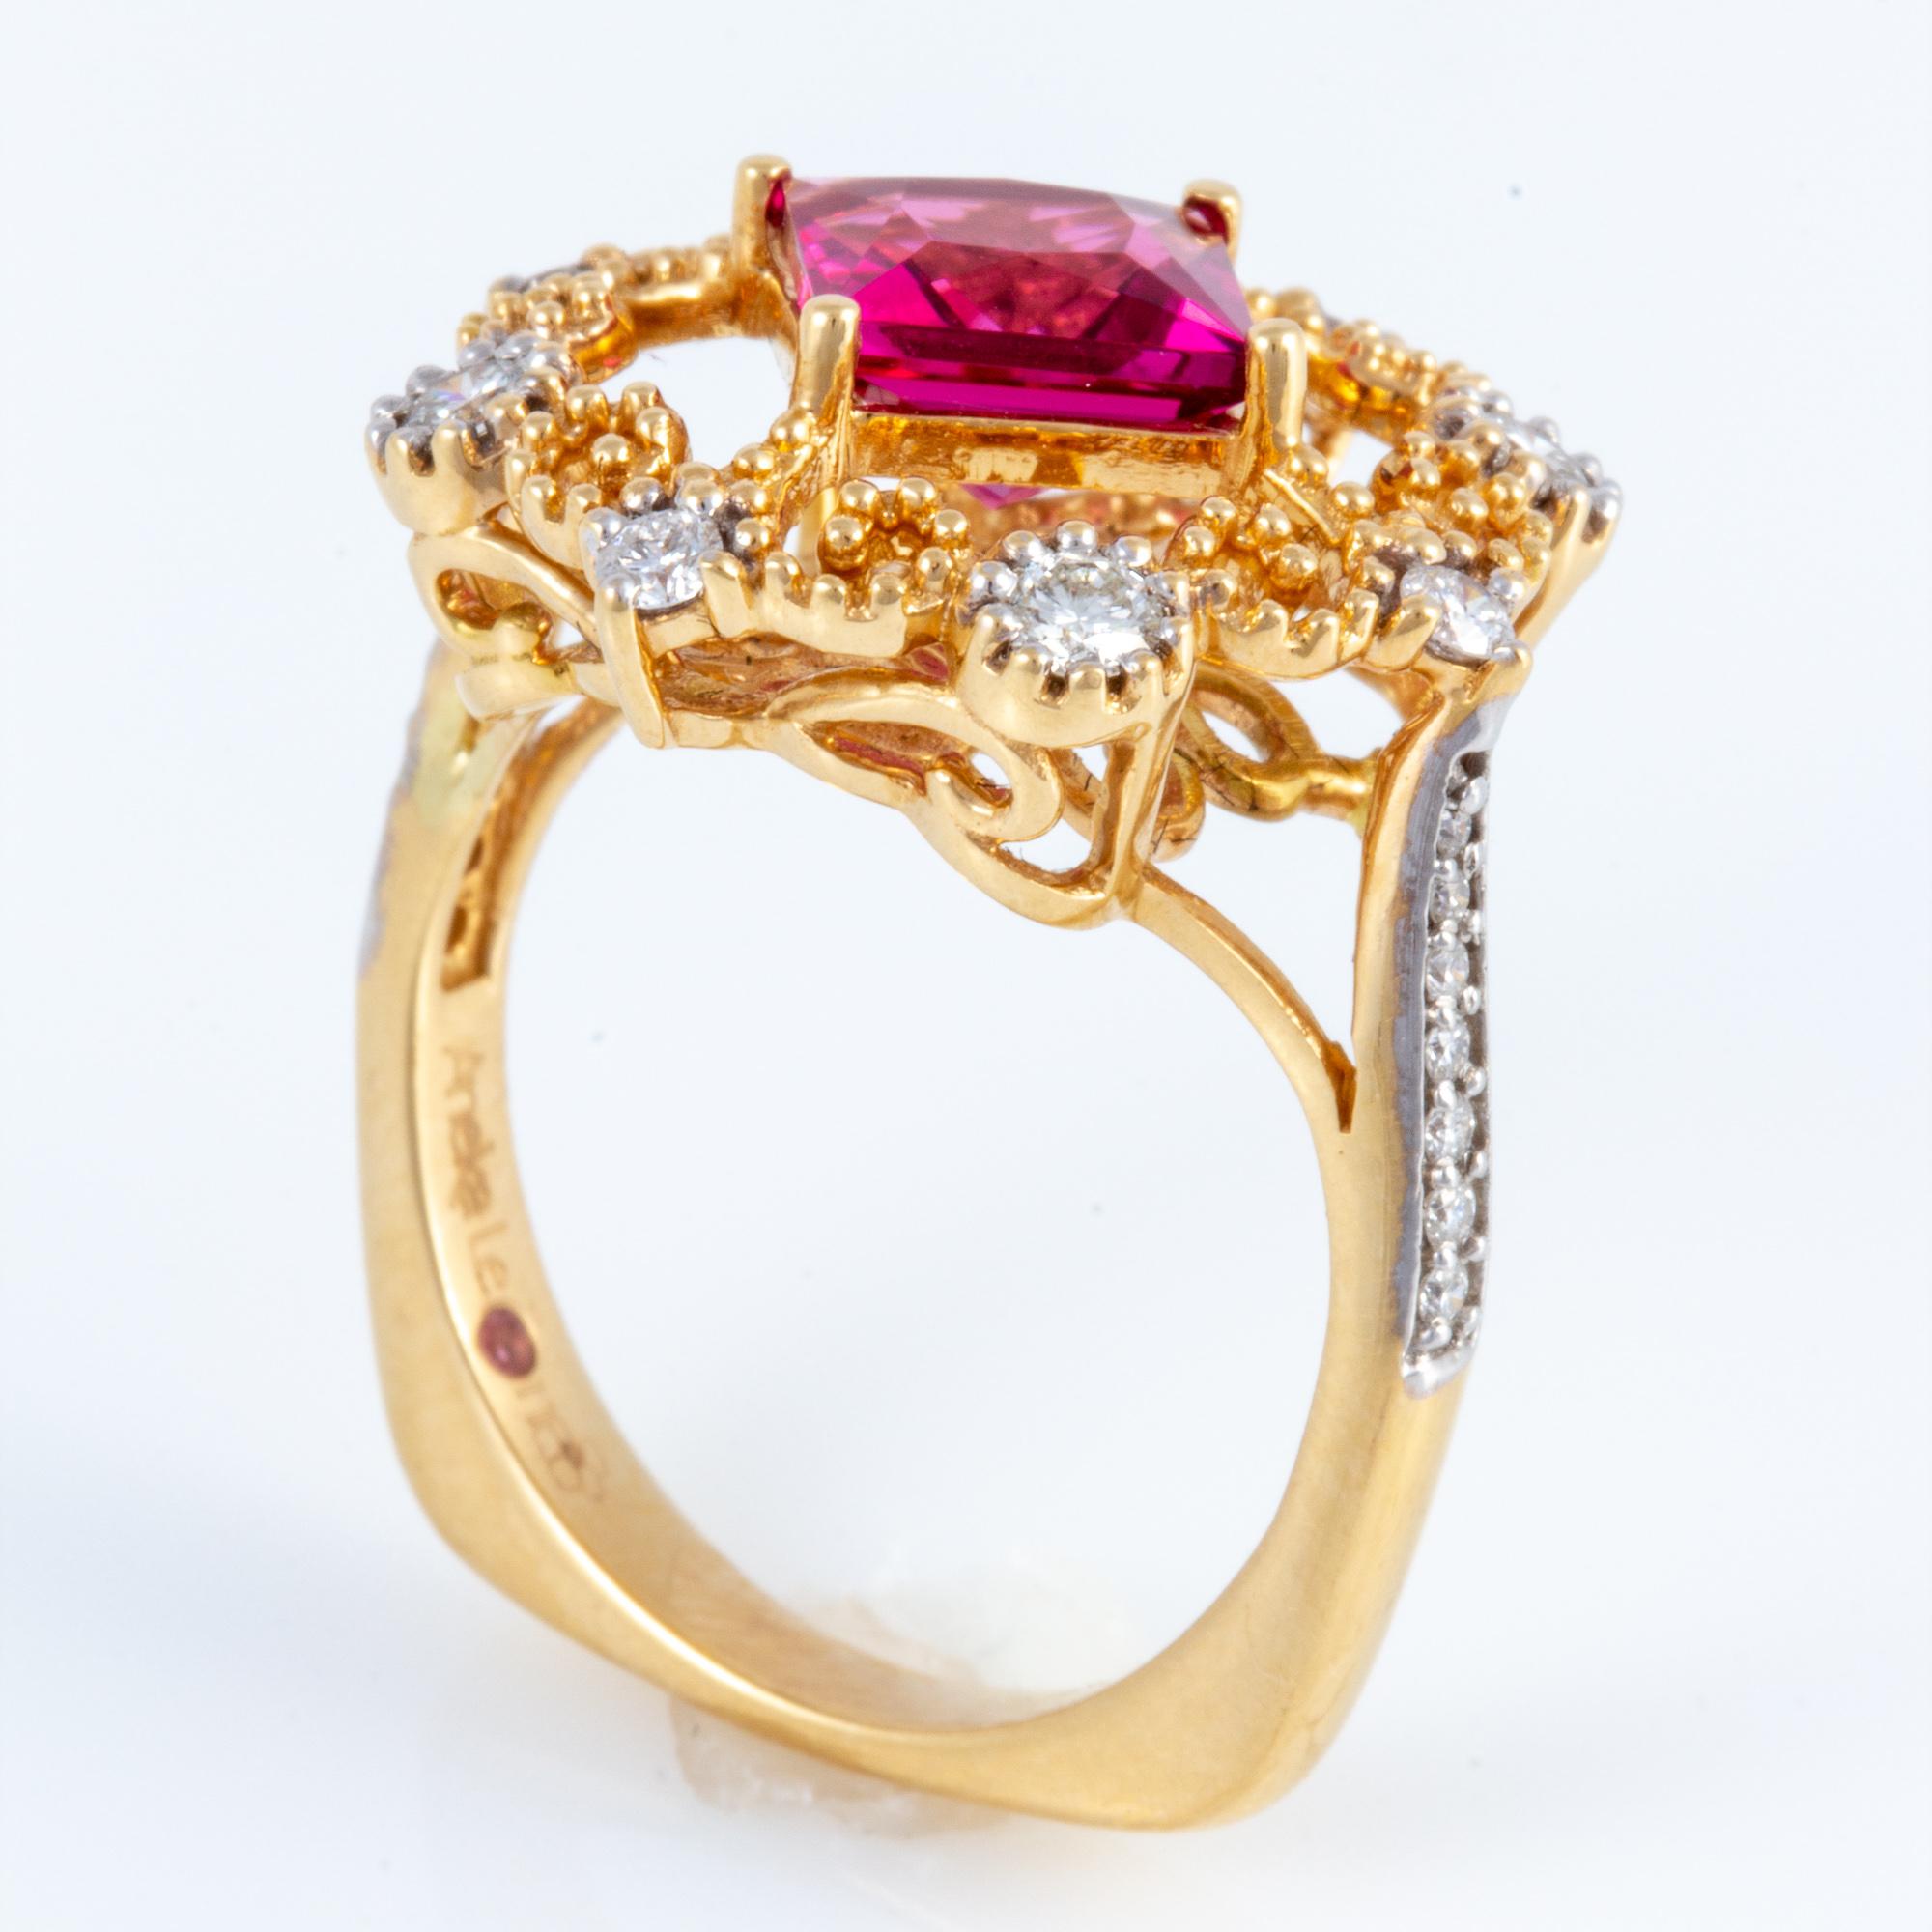 Rubellite Tourmaline and Diamond Ring set in 18 kt Gold For Sale 8